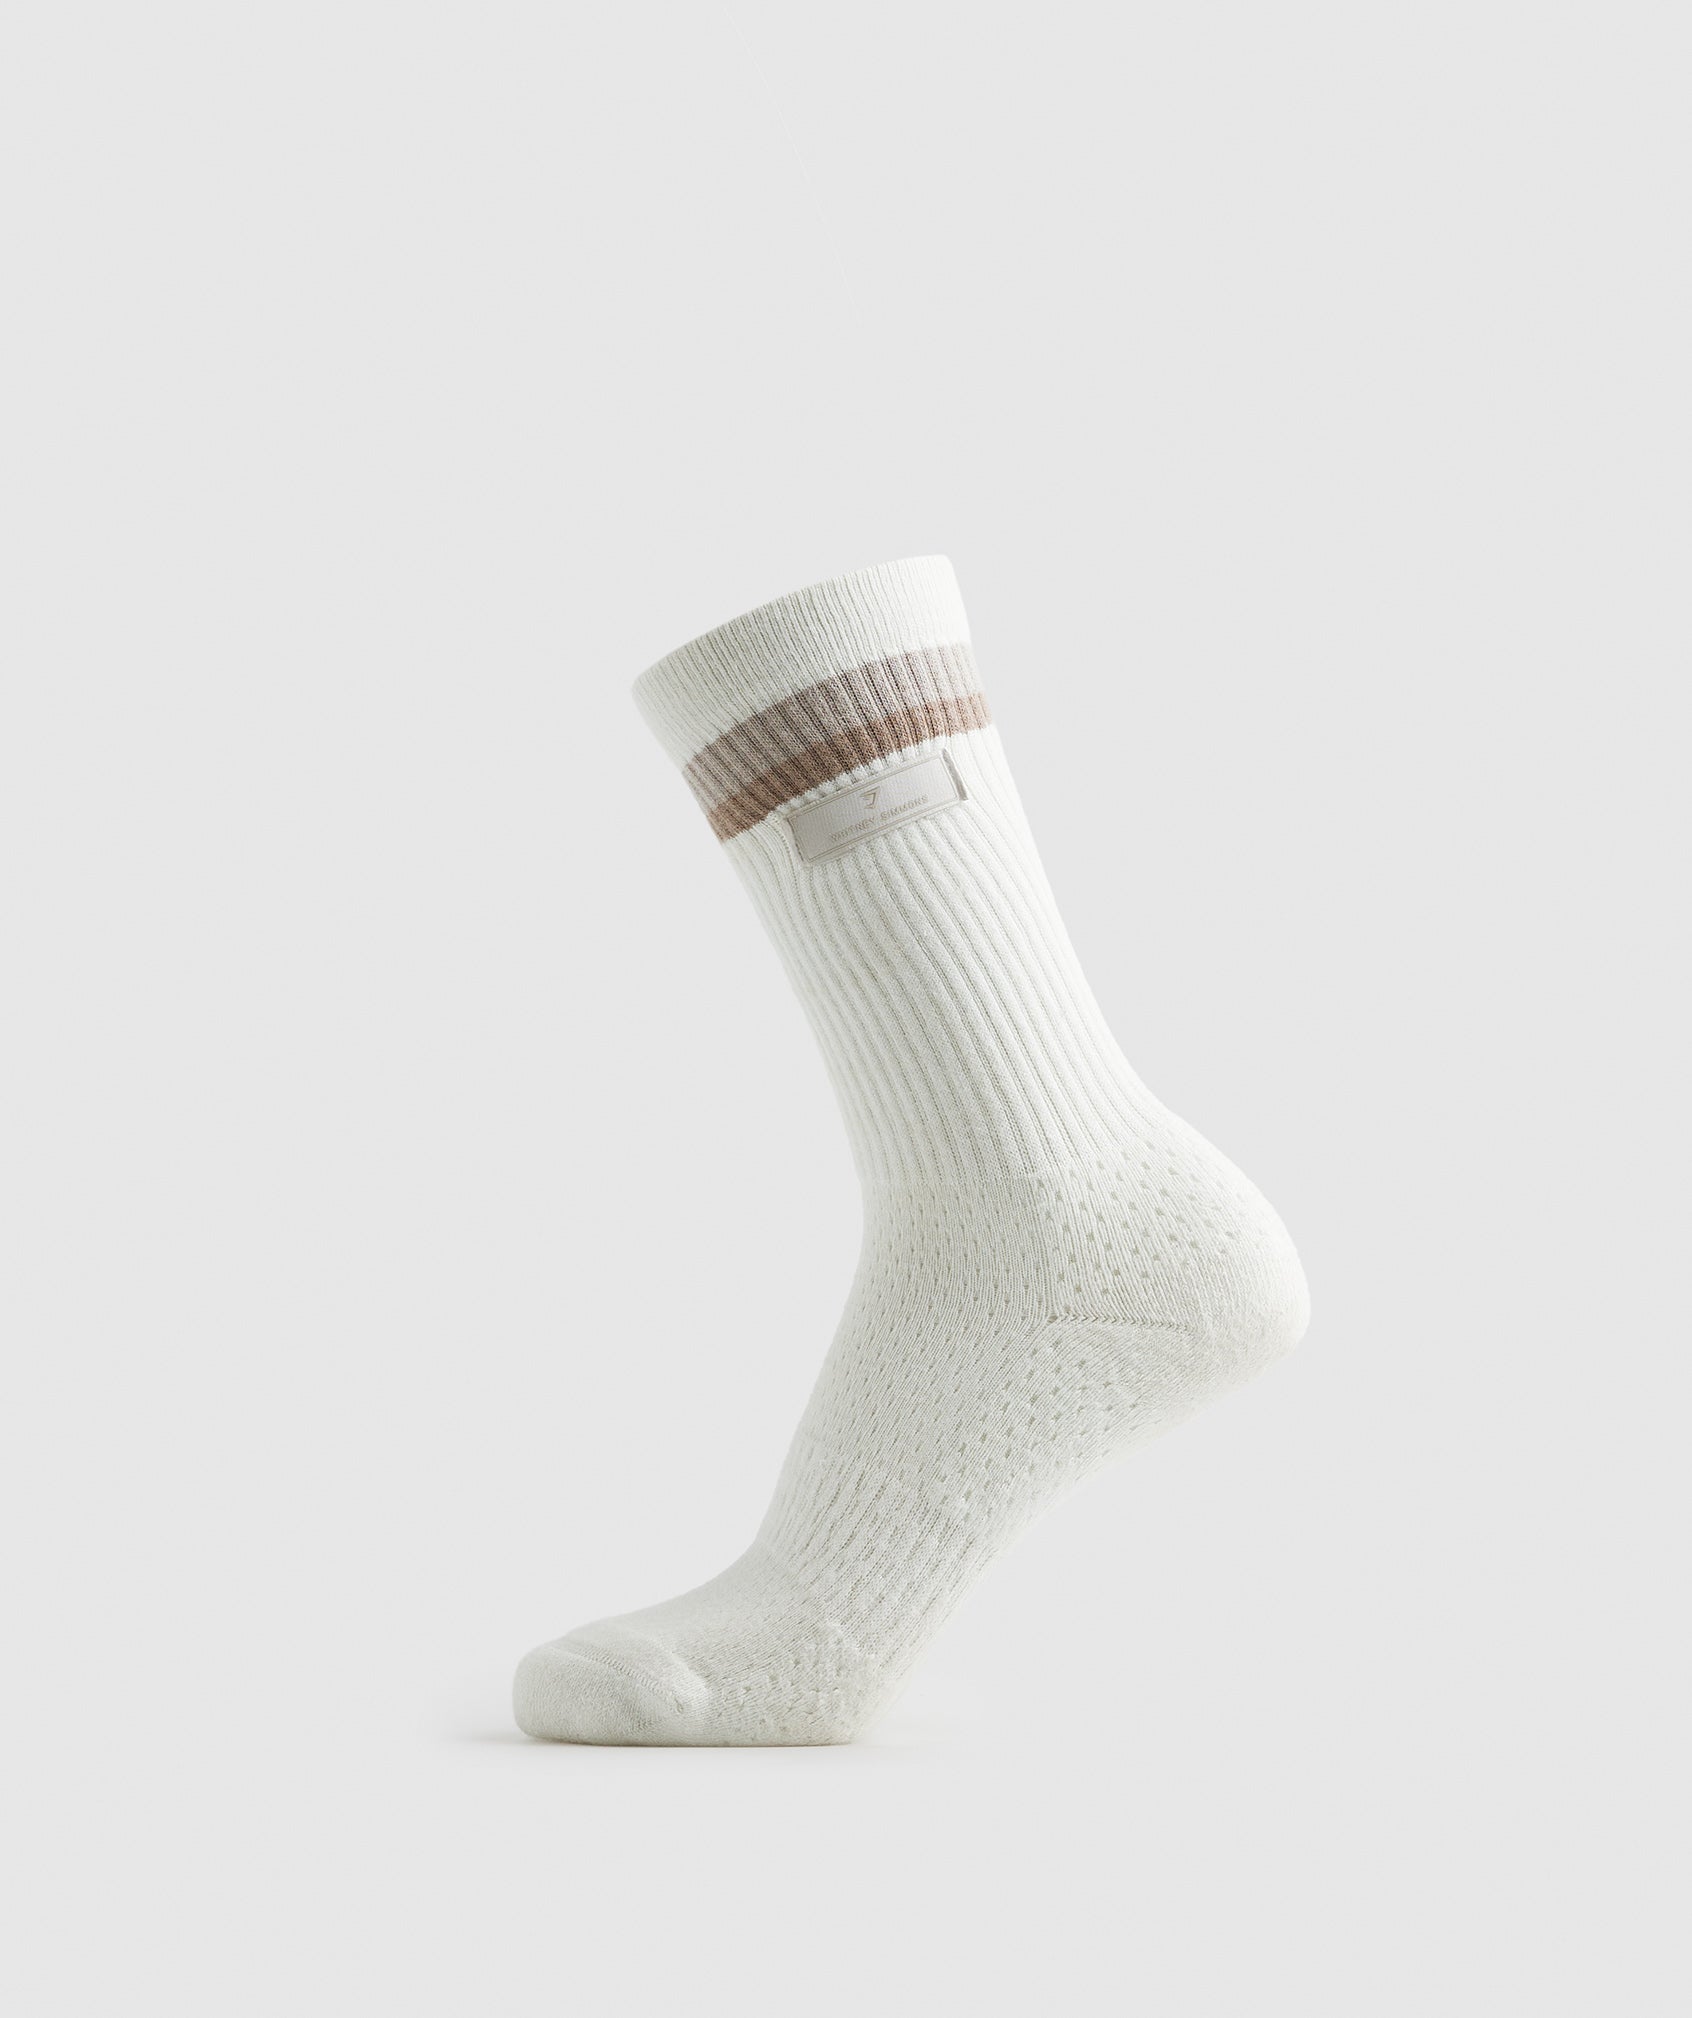 Whitney Crew Socks in Skylight White/Cozy Grey/Cement Brown/Leaf Green - view 4